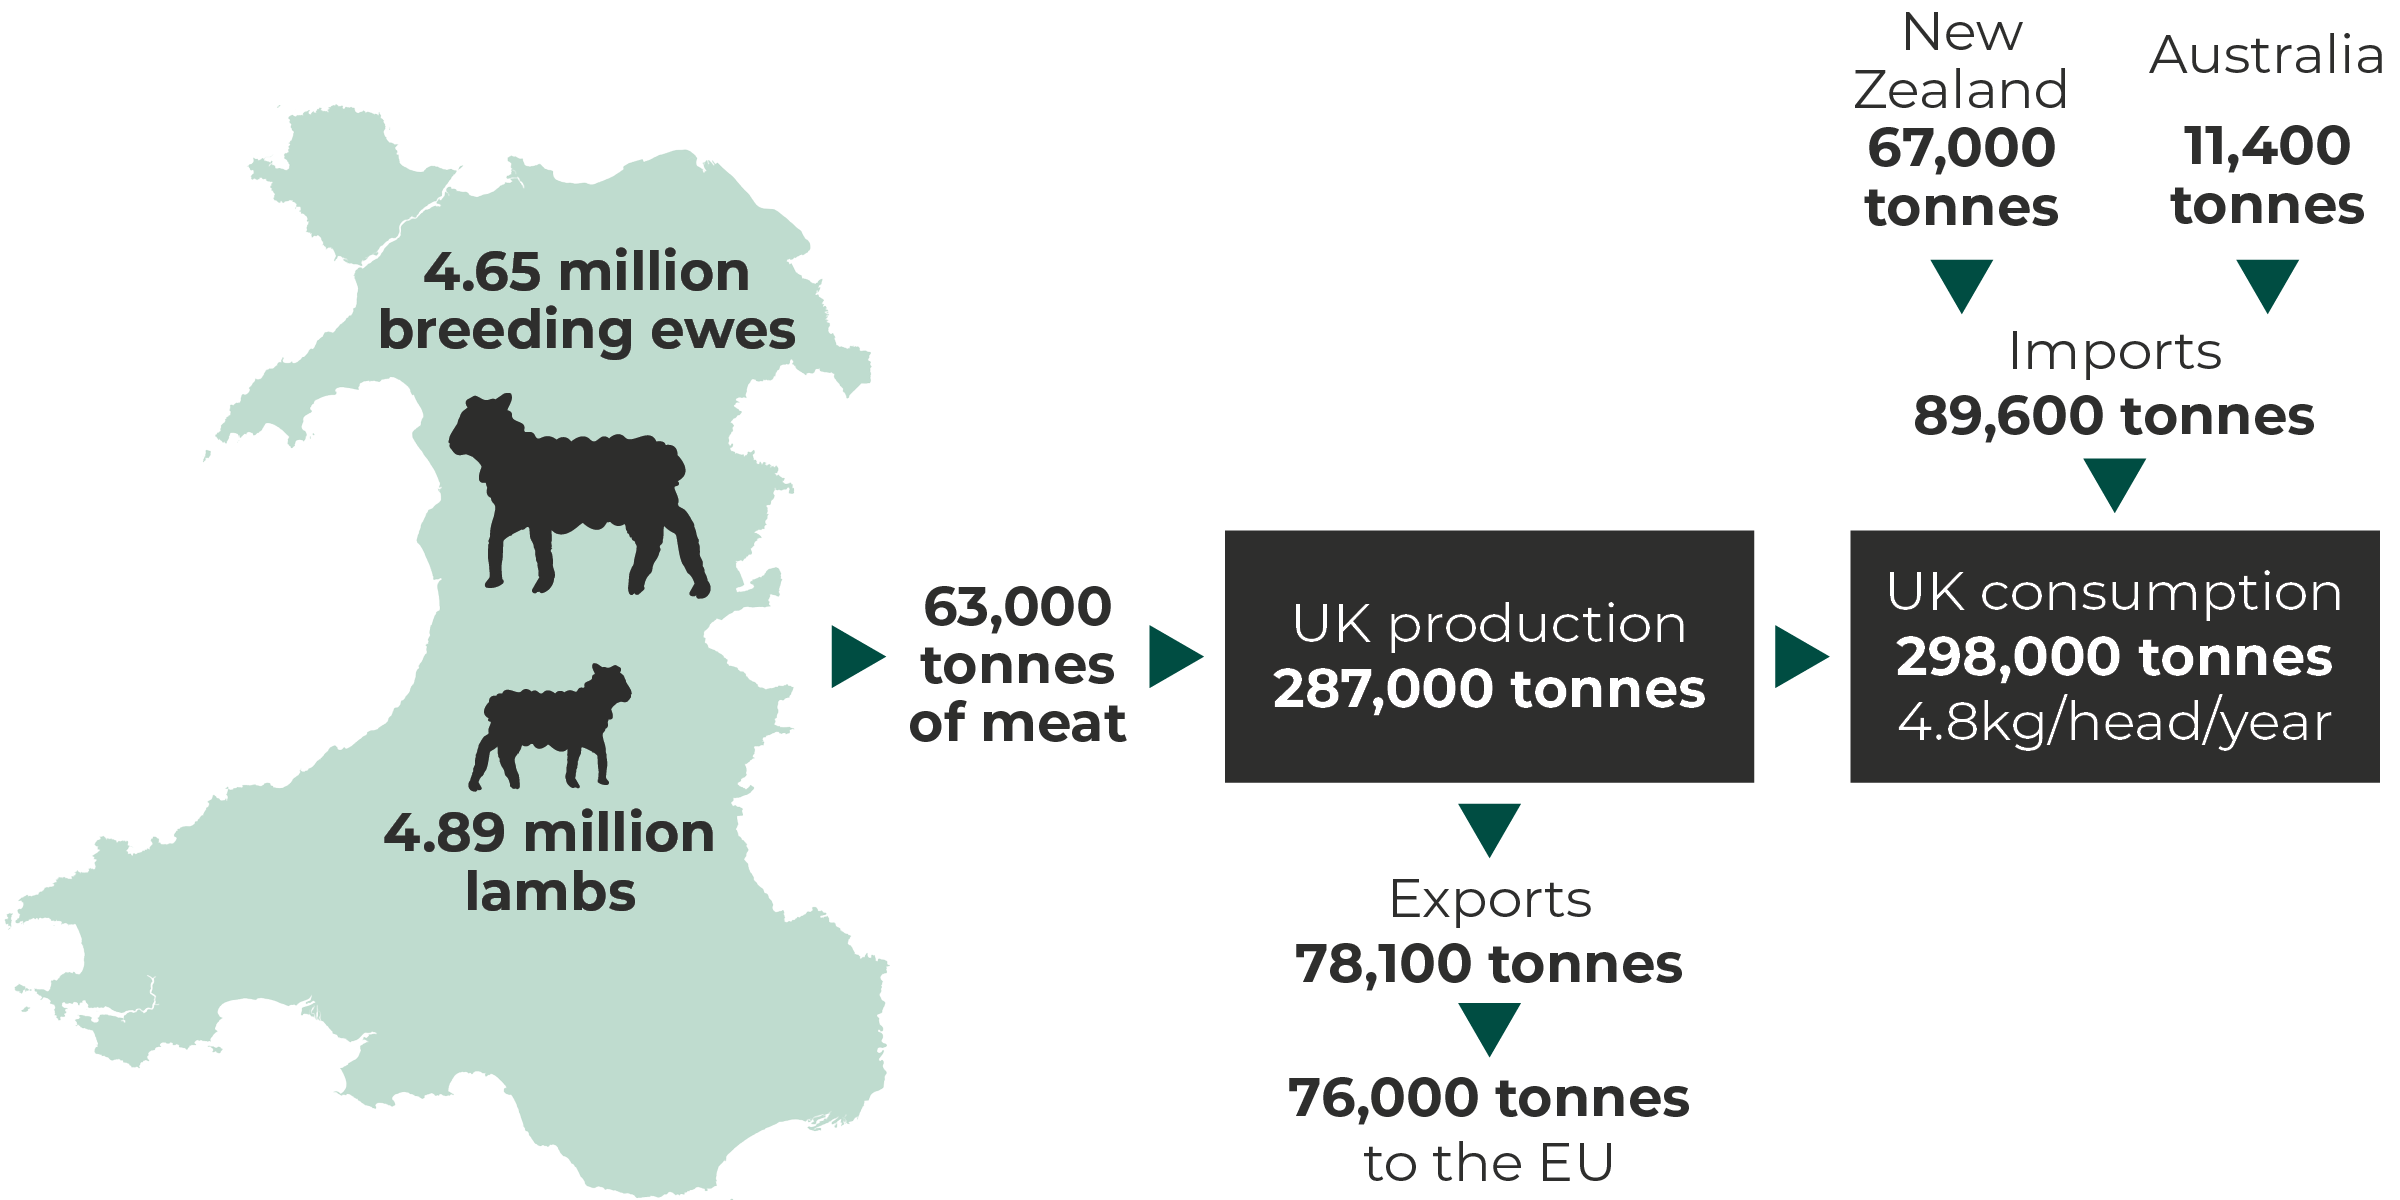 Trade flow for lamb from Welsh farms- Livestock in Wales: 4.65m breeding ewes, 4.89m lambs. Production: 63,000 tonnes of meat in Wales, 287,000 tonnes in the UK. UK consumption: 298,000 tonnes (4.8kg/head/year). UK exports: 78,100 tonnes in total, 76,000 tones to the EU. UK imports: 89,600 tonnes from New Zealand and Australia (67,000 tonnes and 11,400 tonnes respectively).